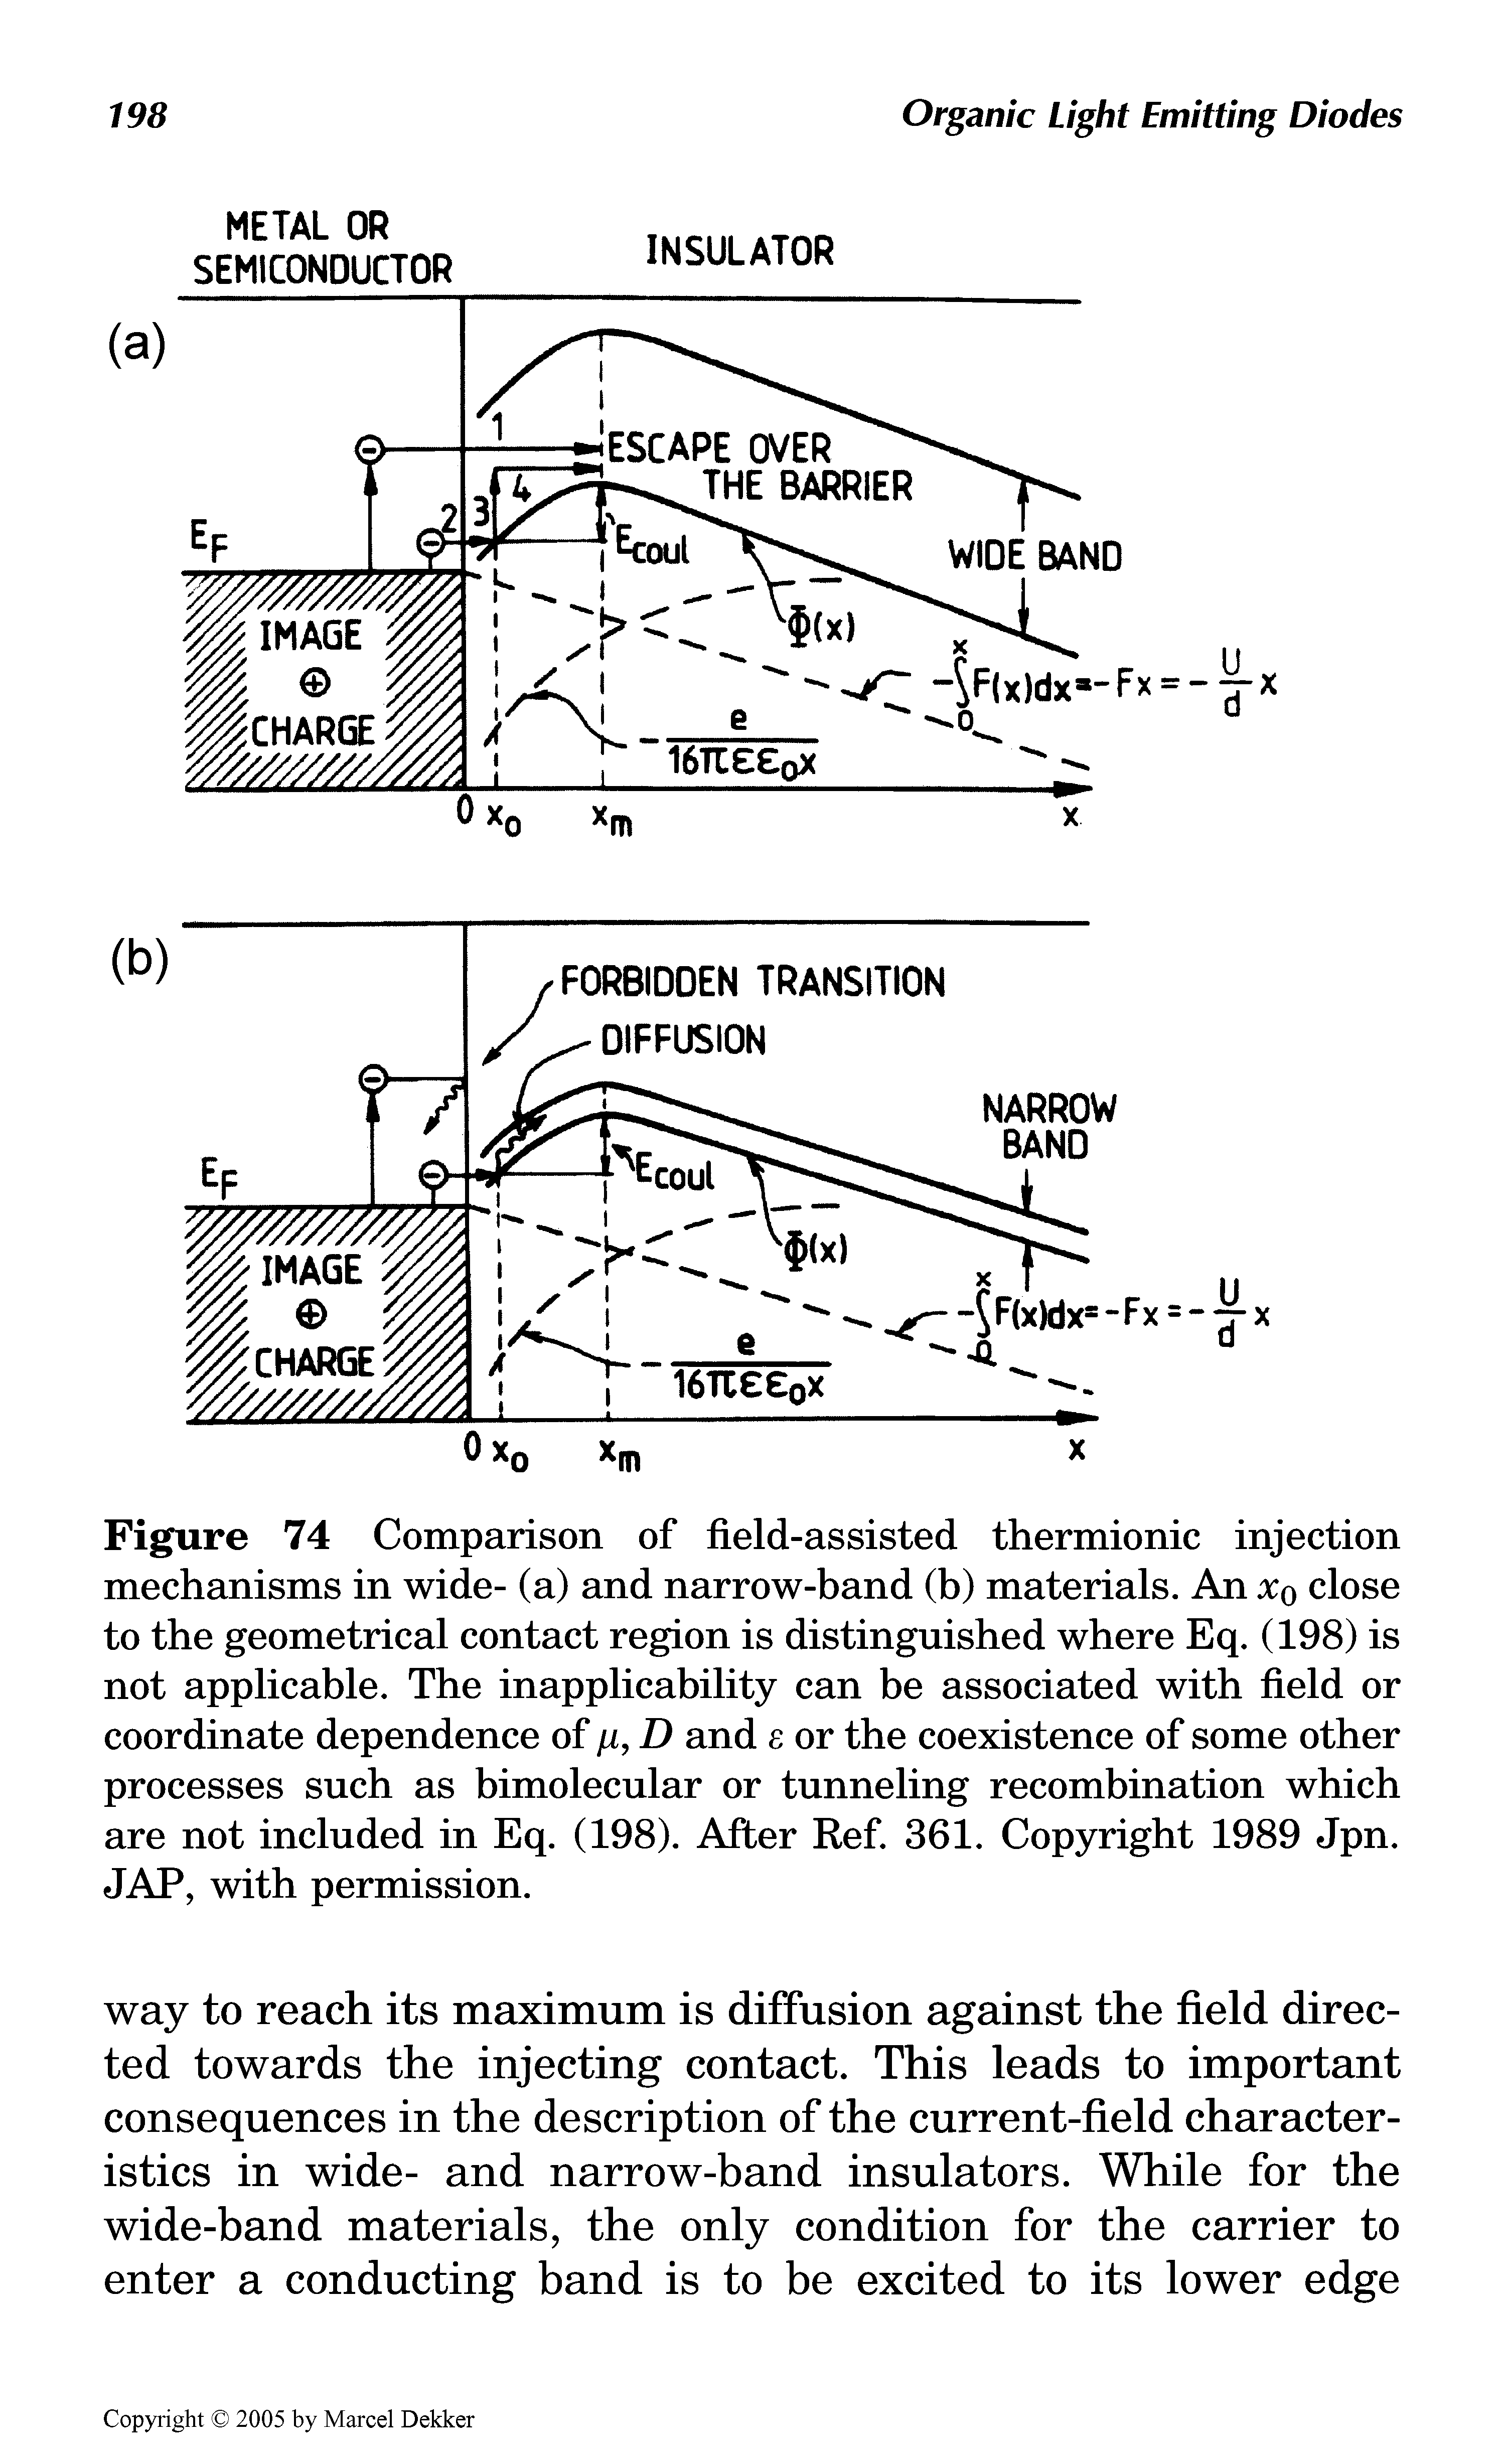 Figure 74 Comparison of field-assisted thermionic injection mechanisms in wide- (a) and narrow-band (b) materials. An x0 close to the geometrical contact region is distinguished where Eq. (198) is not applicable. The inapplicability can be associated with field or coordinate dependence of /1, D and s or the coexistence of some other processes such as bimolecular or tunneling recombination which are not included in Eq. (198). After Ref. 361. Copyright 1989 Jpn. JAP, with permission.